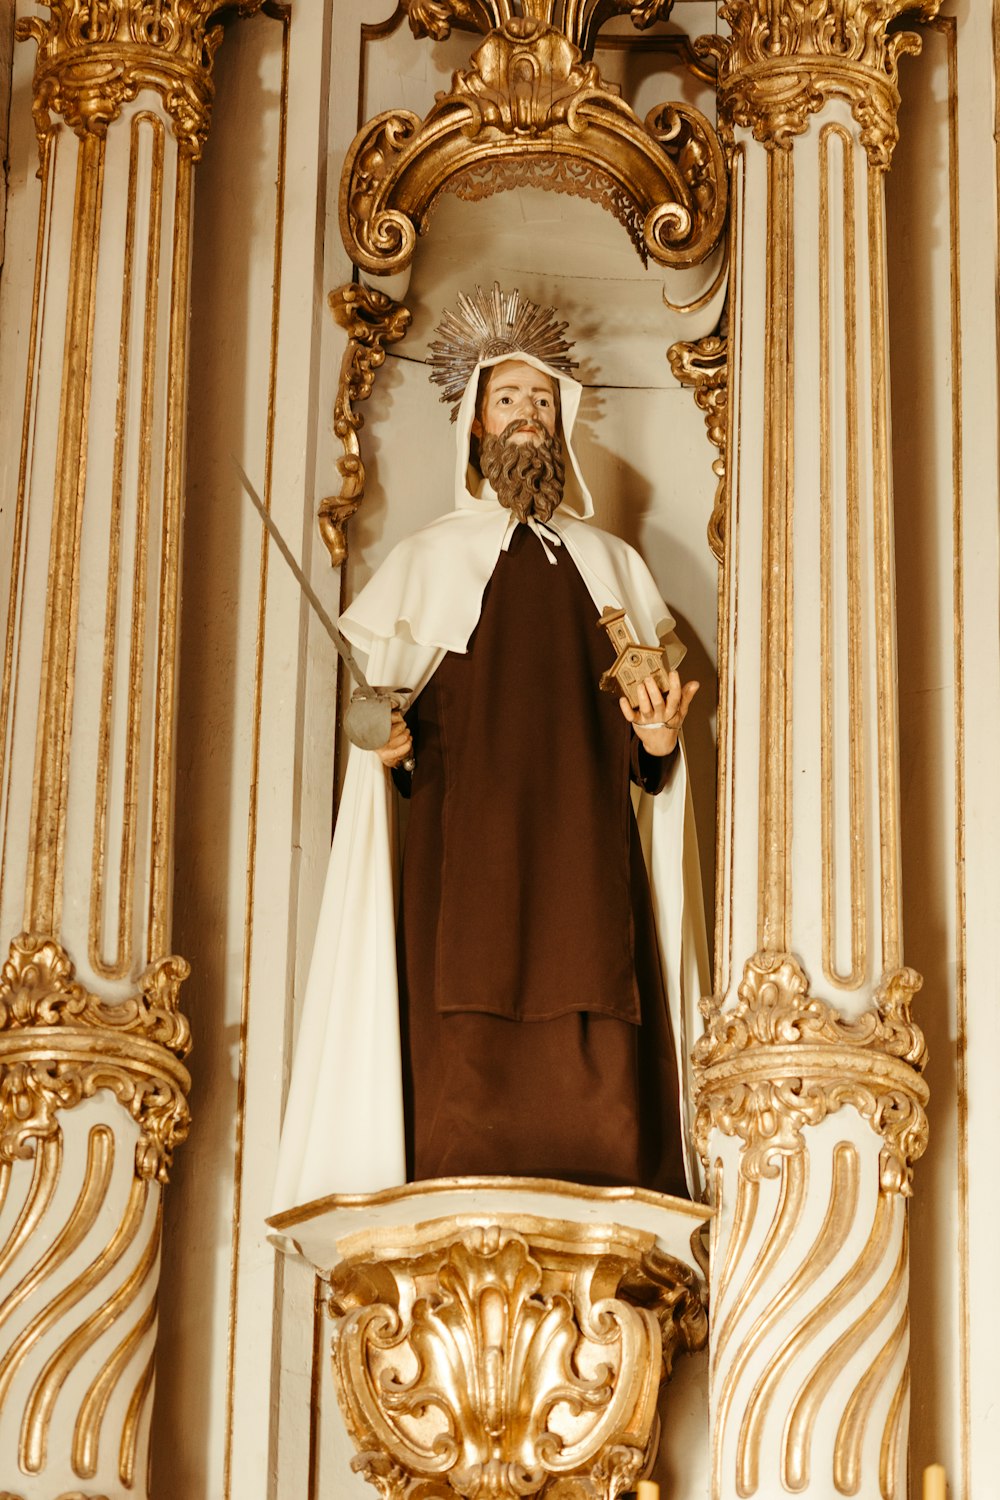 a statue of a man with a beard in a church